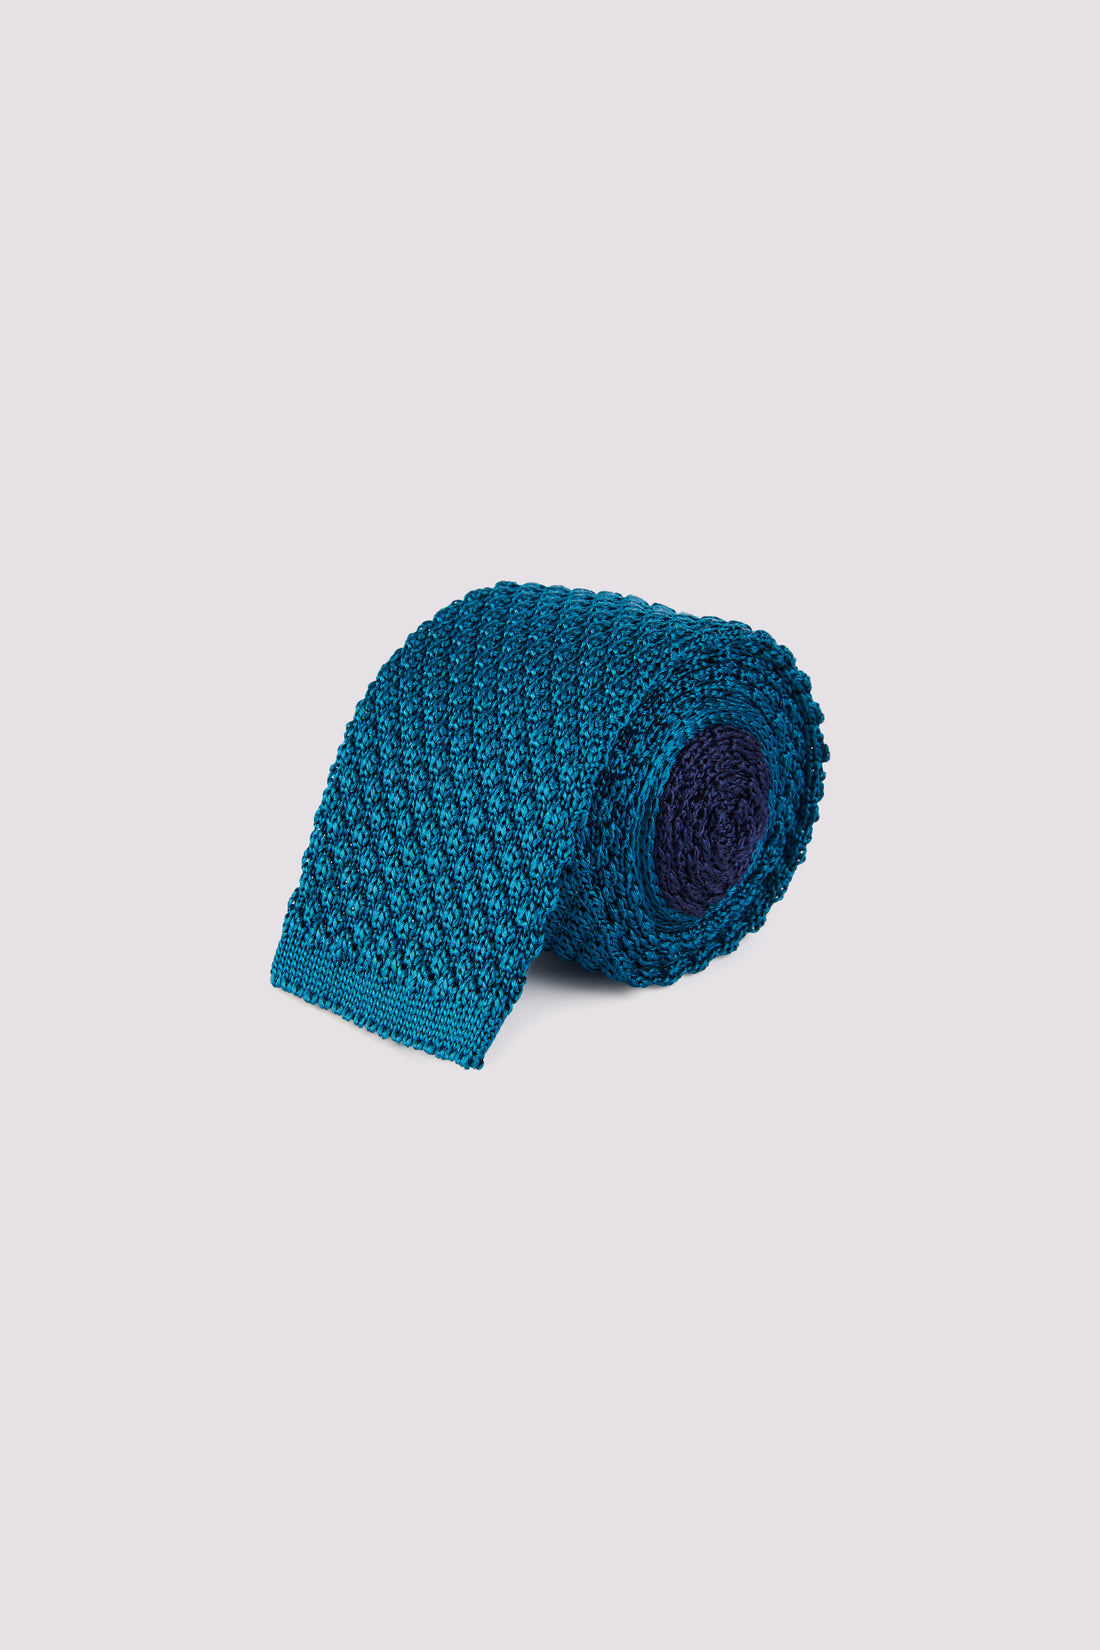 100% Silk Knitted Tie Teal Blue